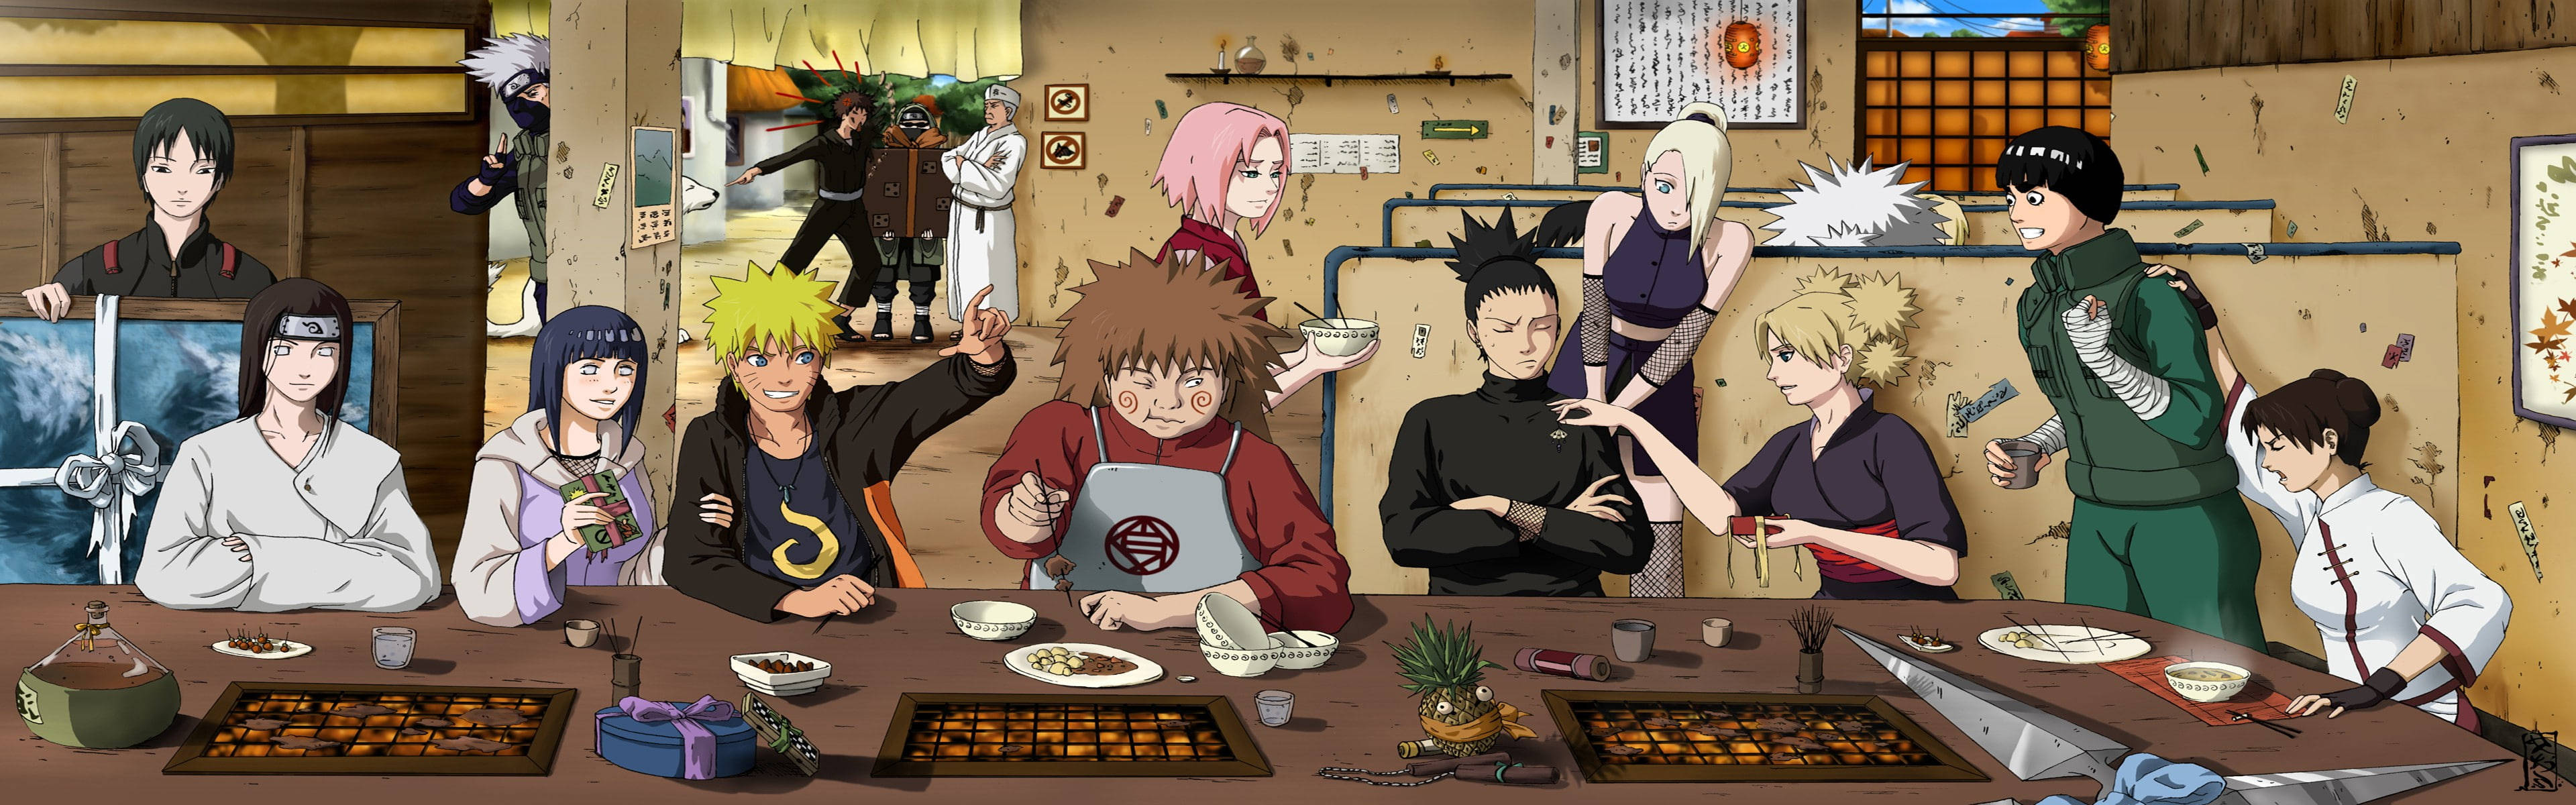 Rock Lee Eating With Friends Wallpaper